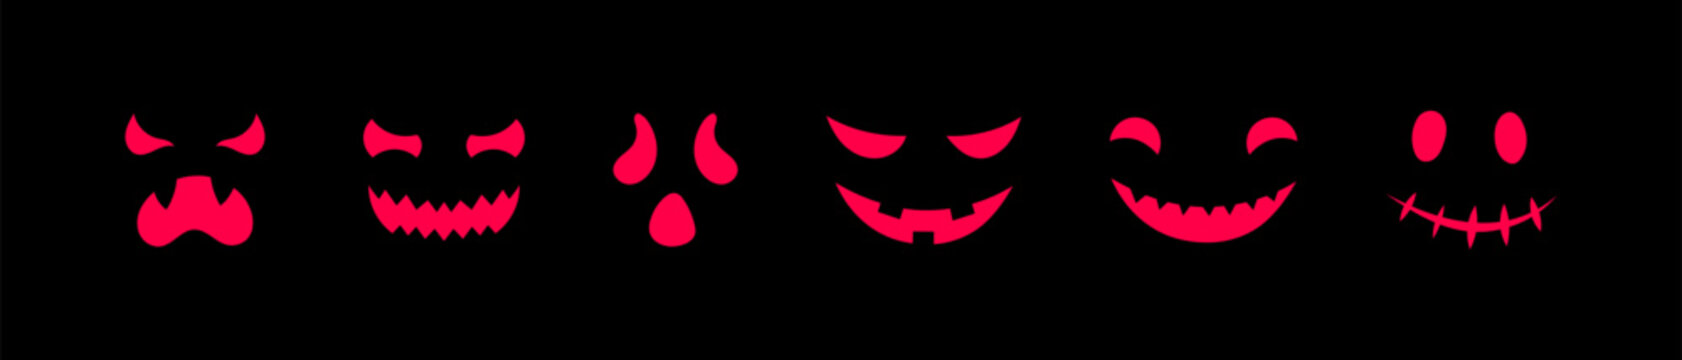 Vector scary faces icons set. Halloween decoration smiling masks. Pumpkin funny smiles. Ghost red face collection isolated on black background for web, decor, fashion print, app